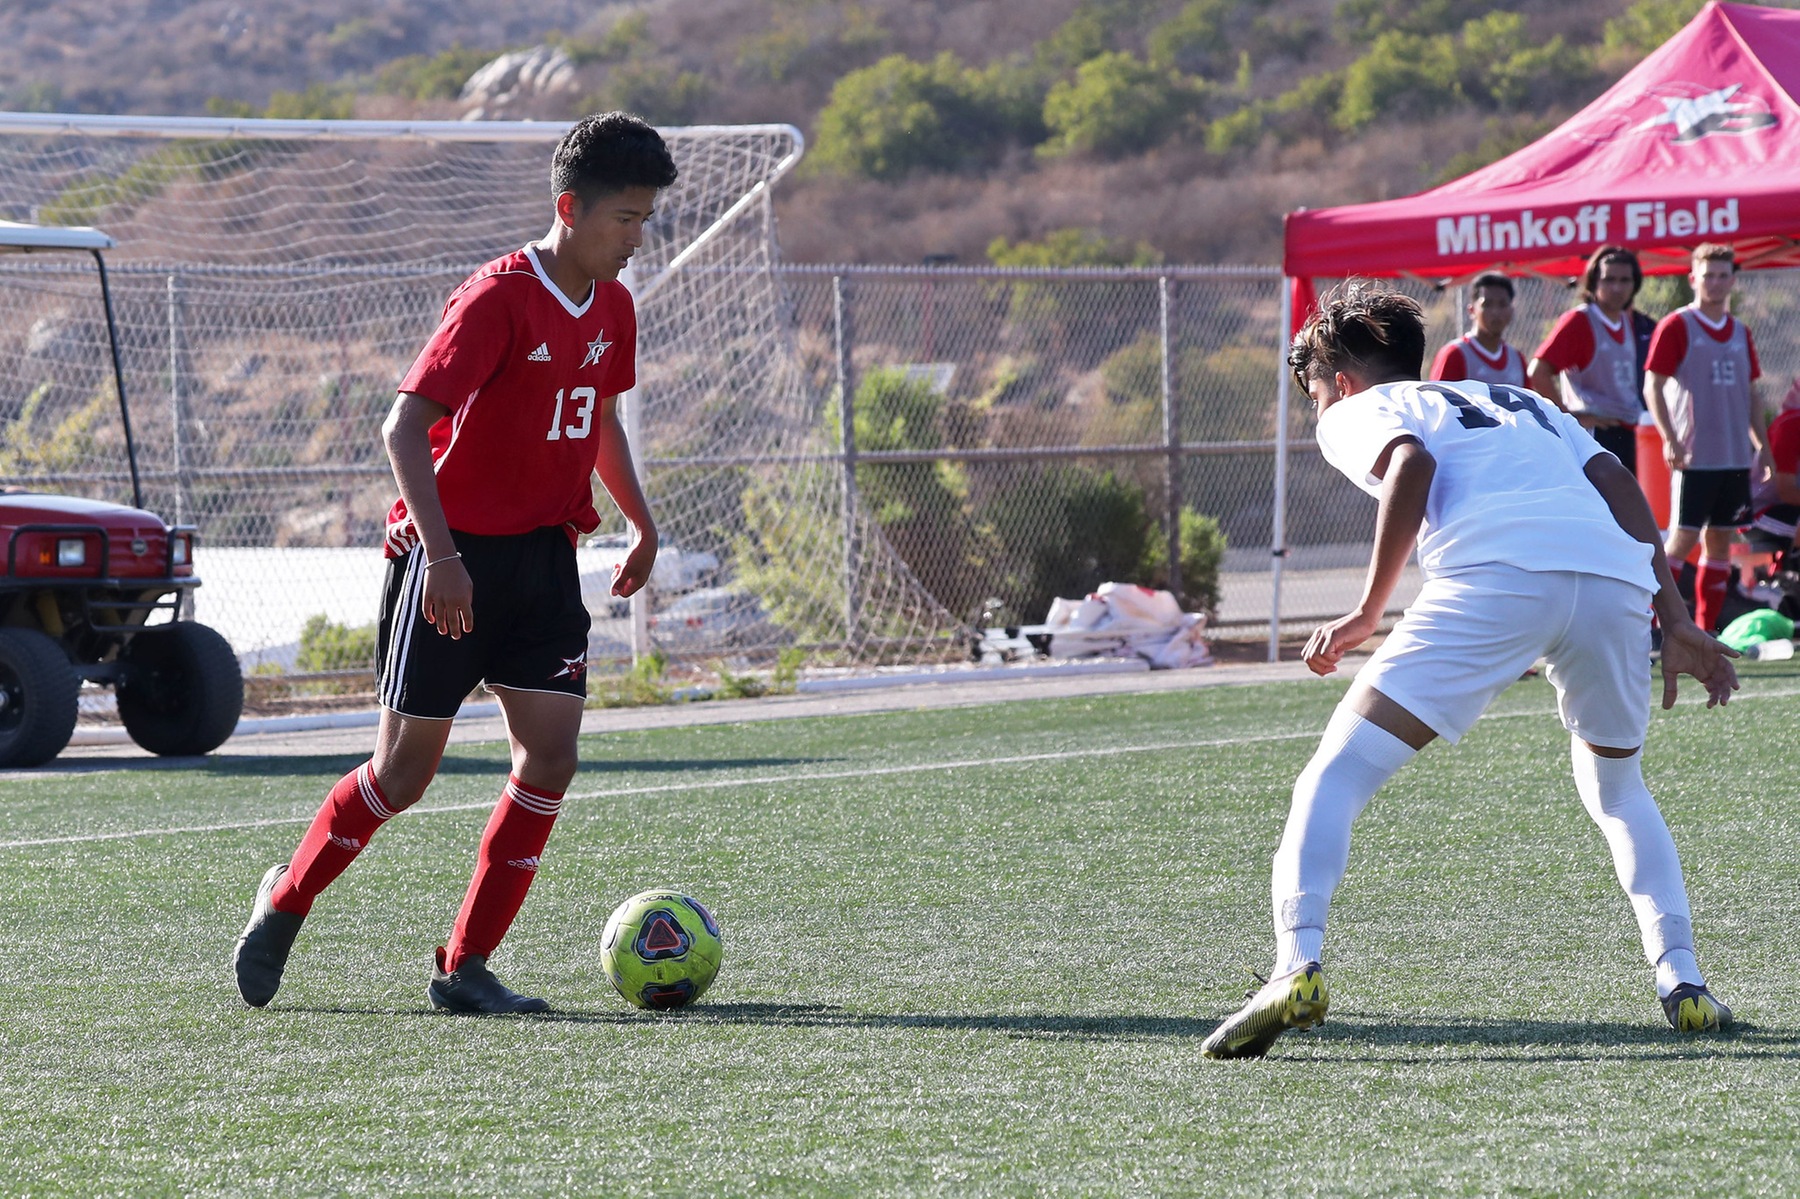 John Bernal scored the second goal for the Comets. Photo by Hugh Cox.